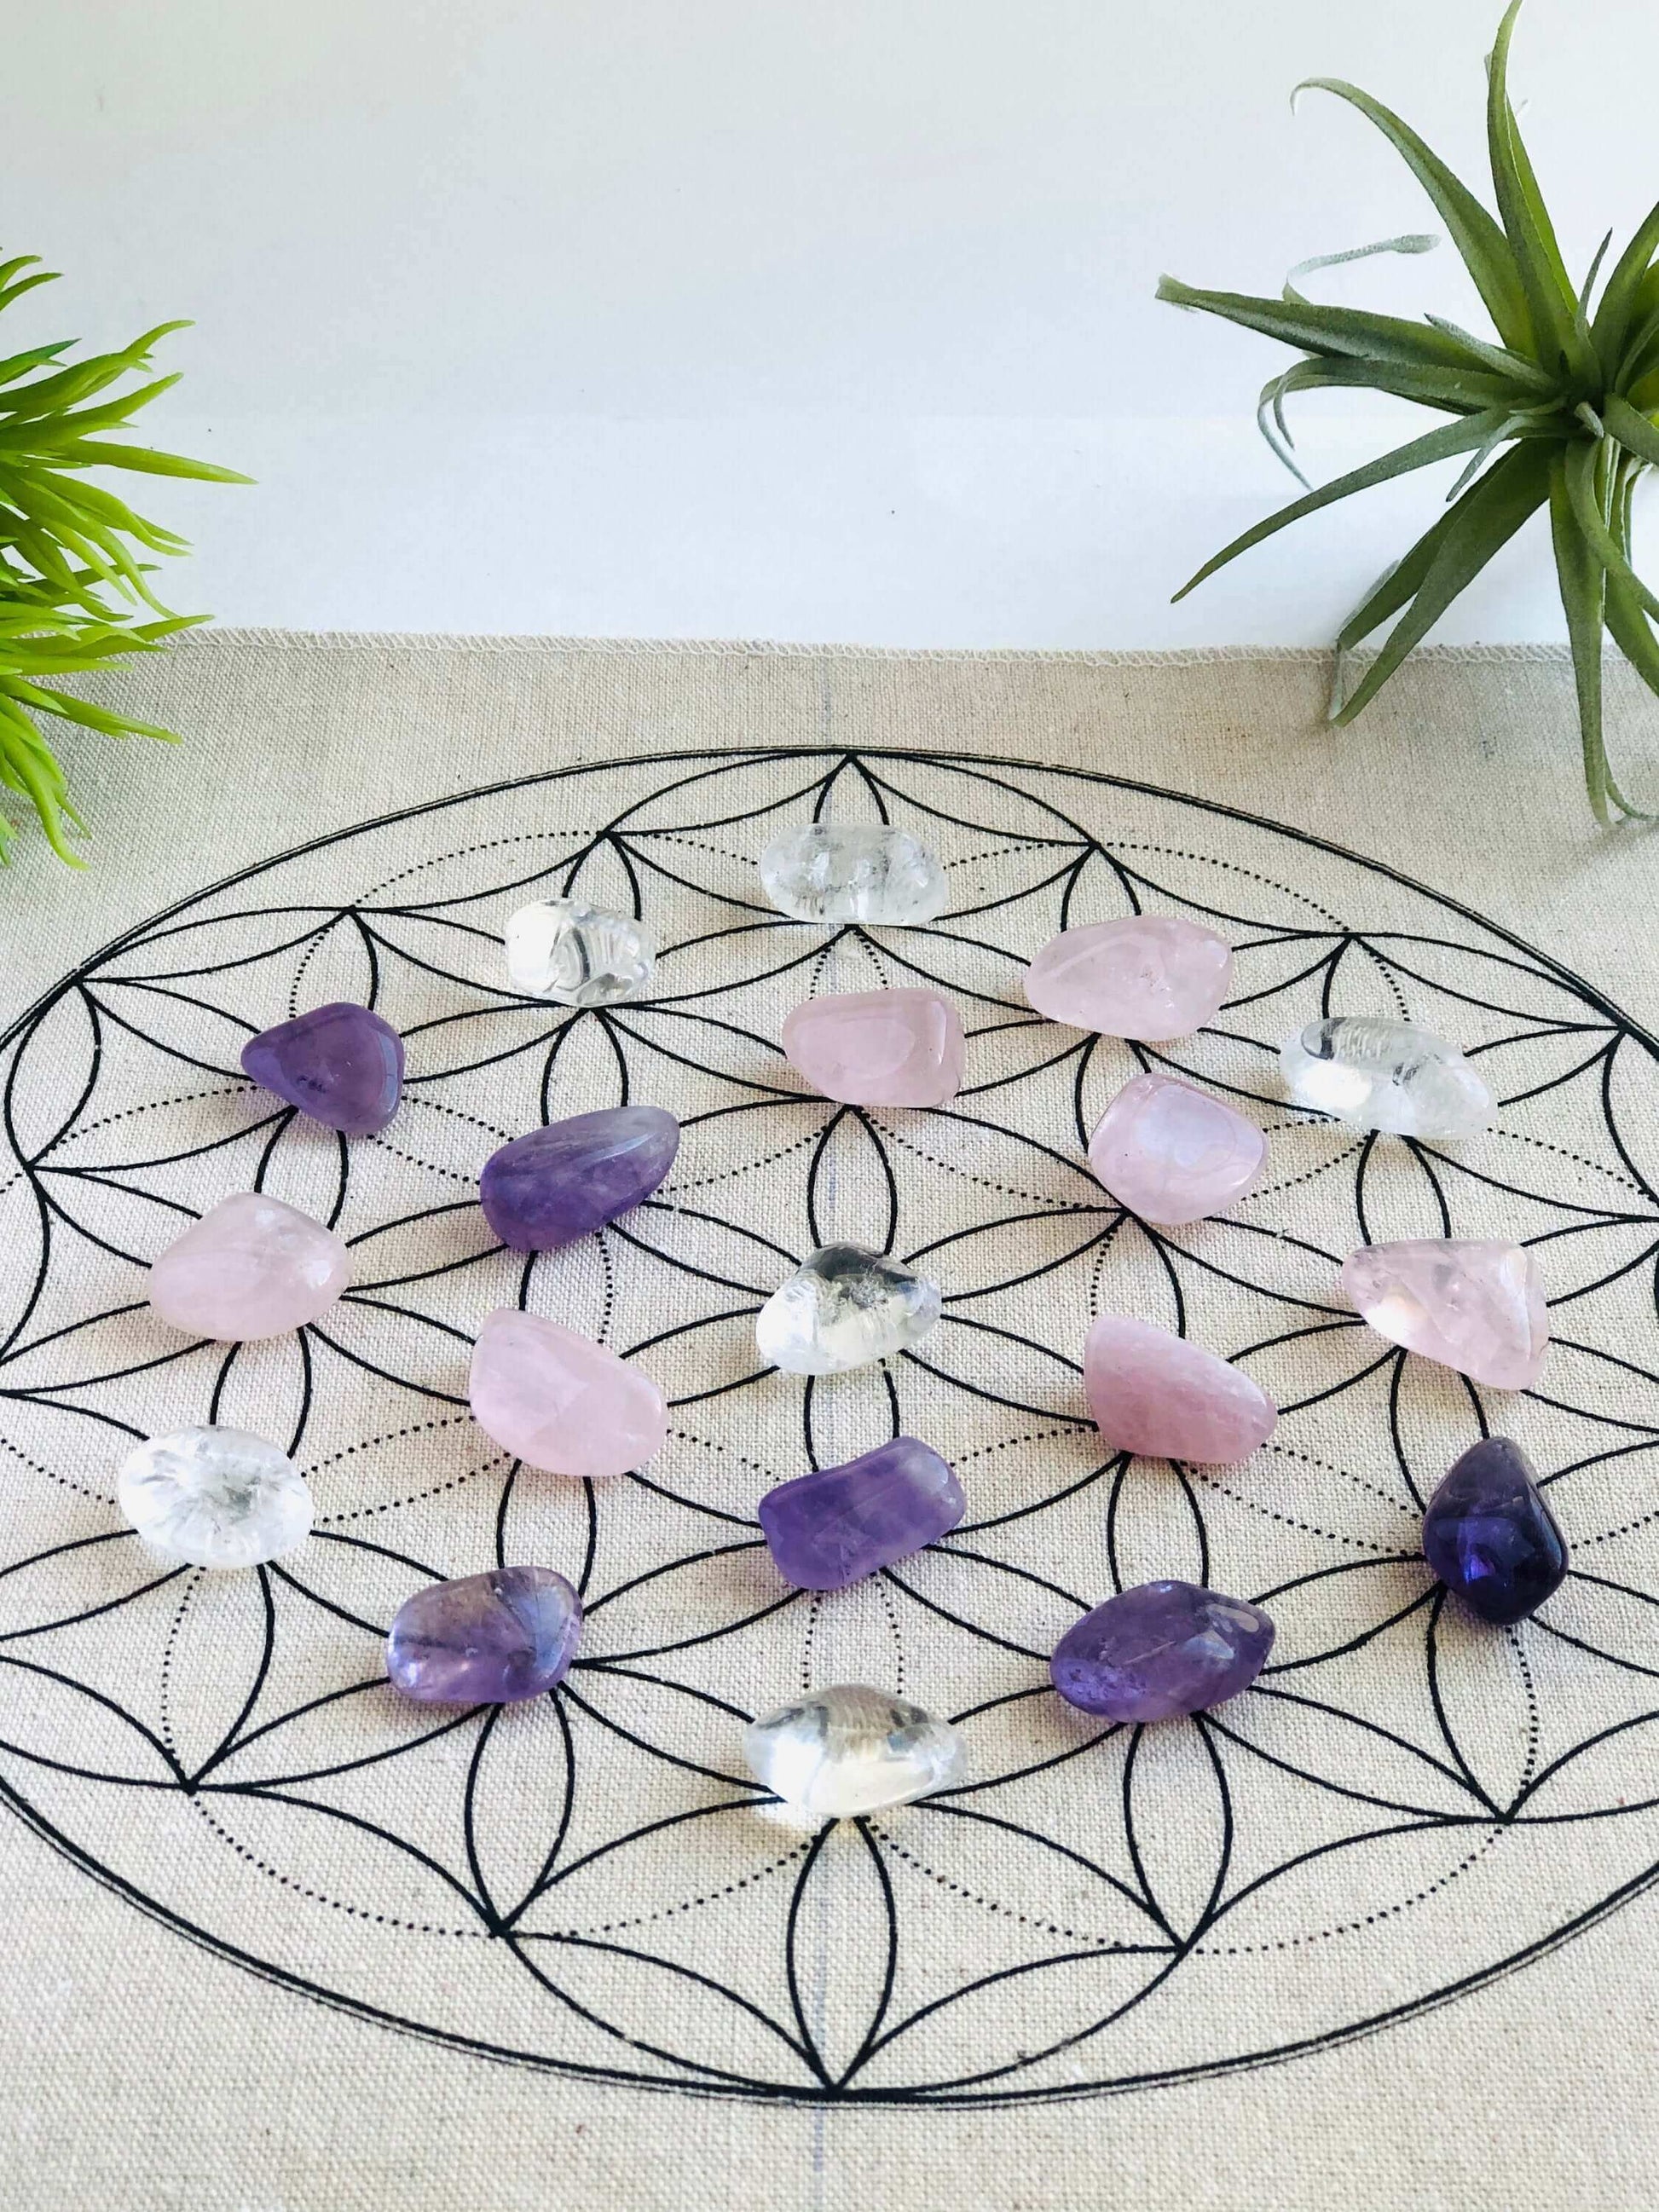 Crystal Grid Kit With Crystals - Flower Of Life